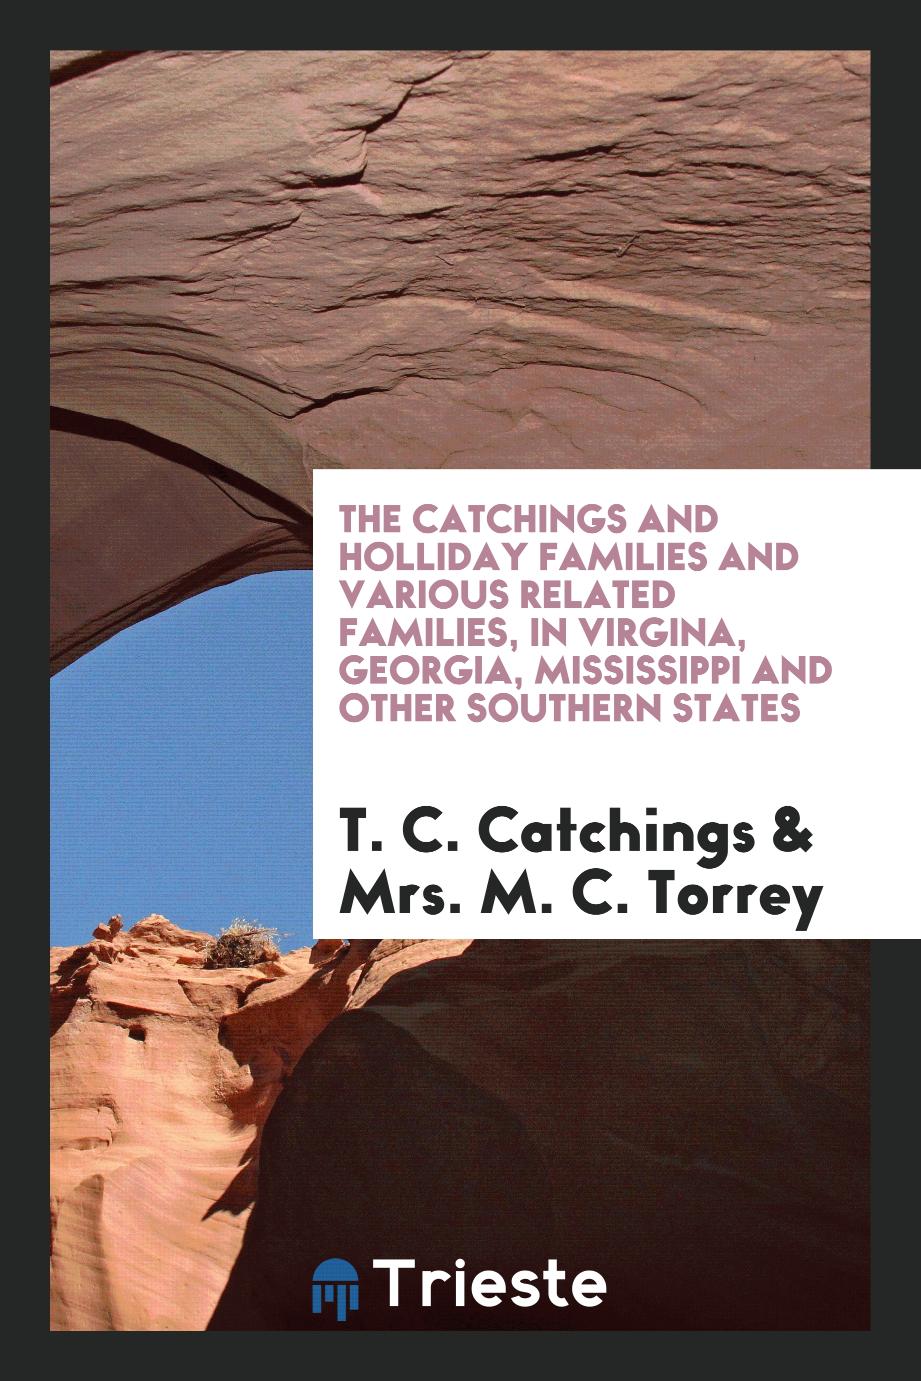 The Catchings and Holliday Families And Various Related Families, in Virgina, Georgia, Mississippi and Other Southern States